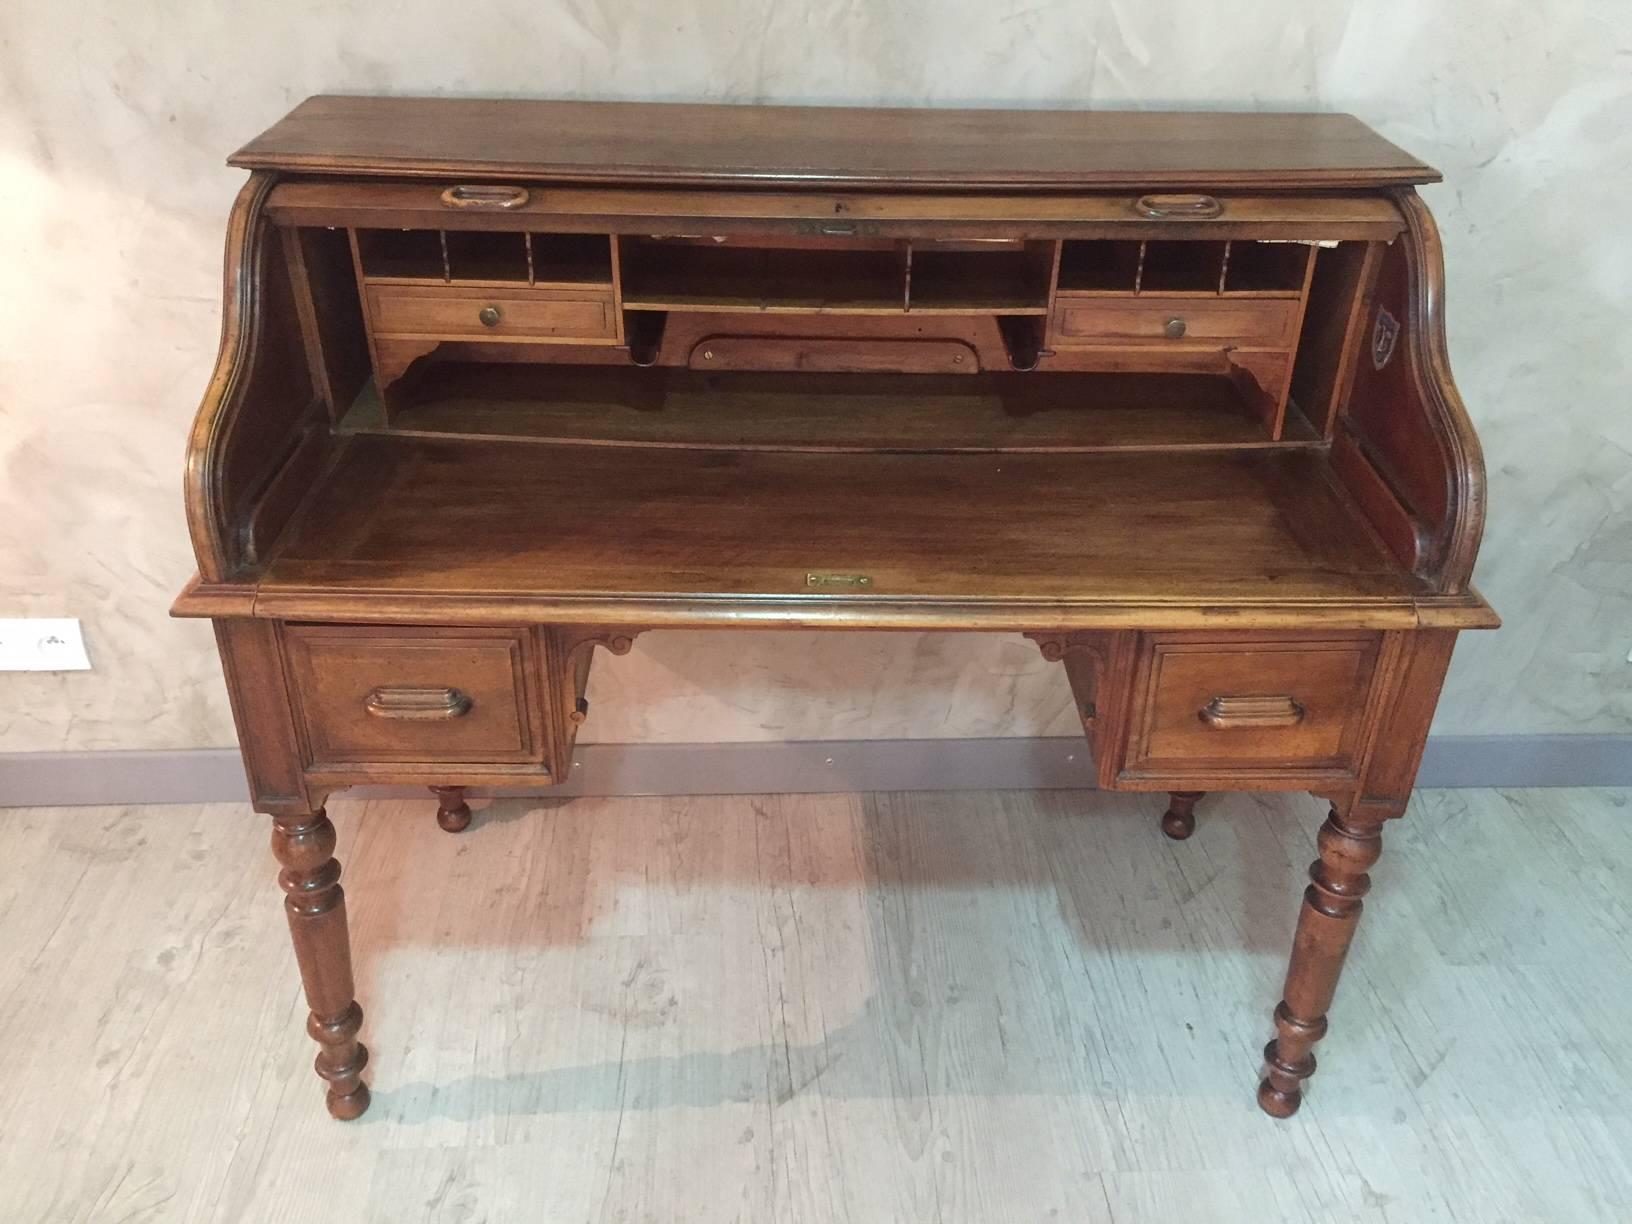 Very nice French Louis Philippe walnut cylinder writing desk with curtain, opening to reveal an arrangement of small drawer and compartment.
The writing surface can be pulled to have a larger work surface.
There are two large drawer in the front.